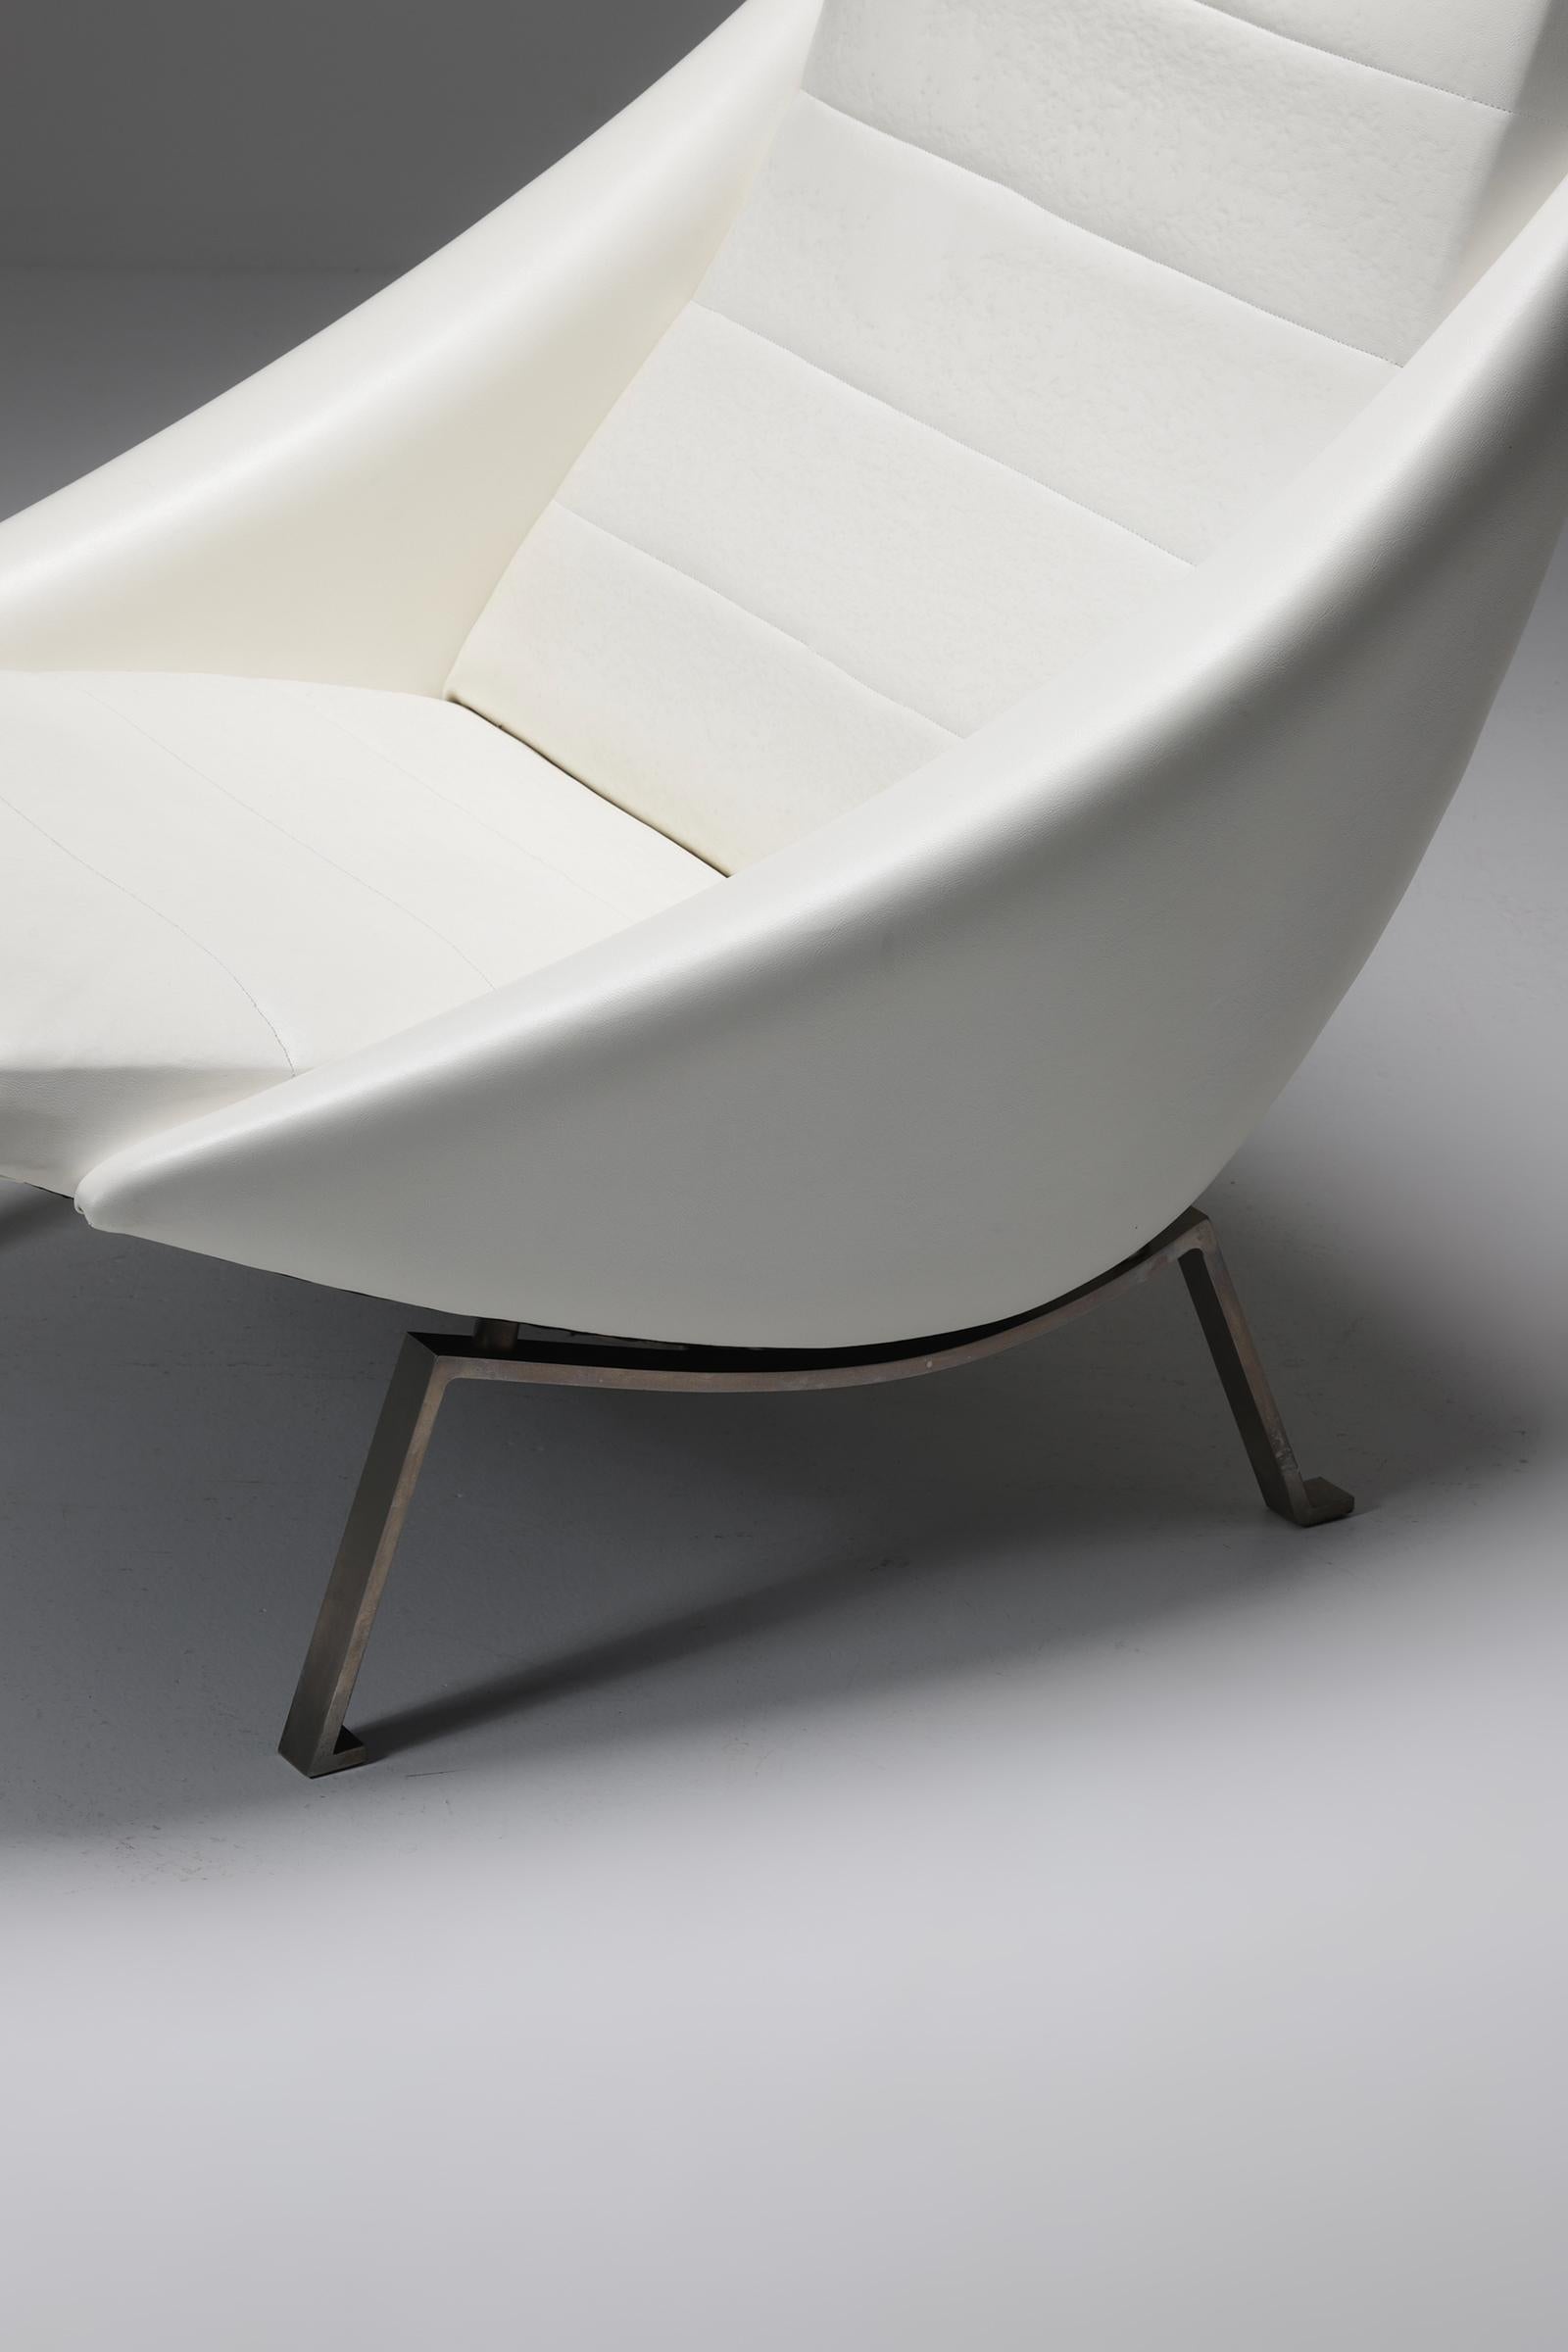 Mid-20th Century Rare Mid-Century Modernist Lounge Chair in White Original Viny 1950 For Sale